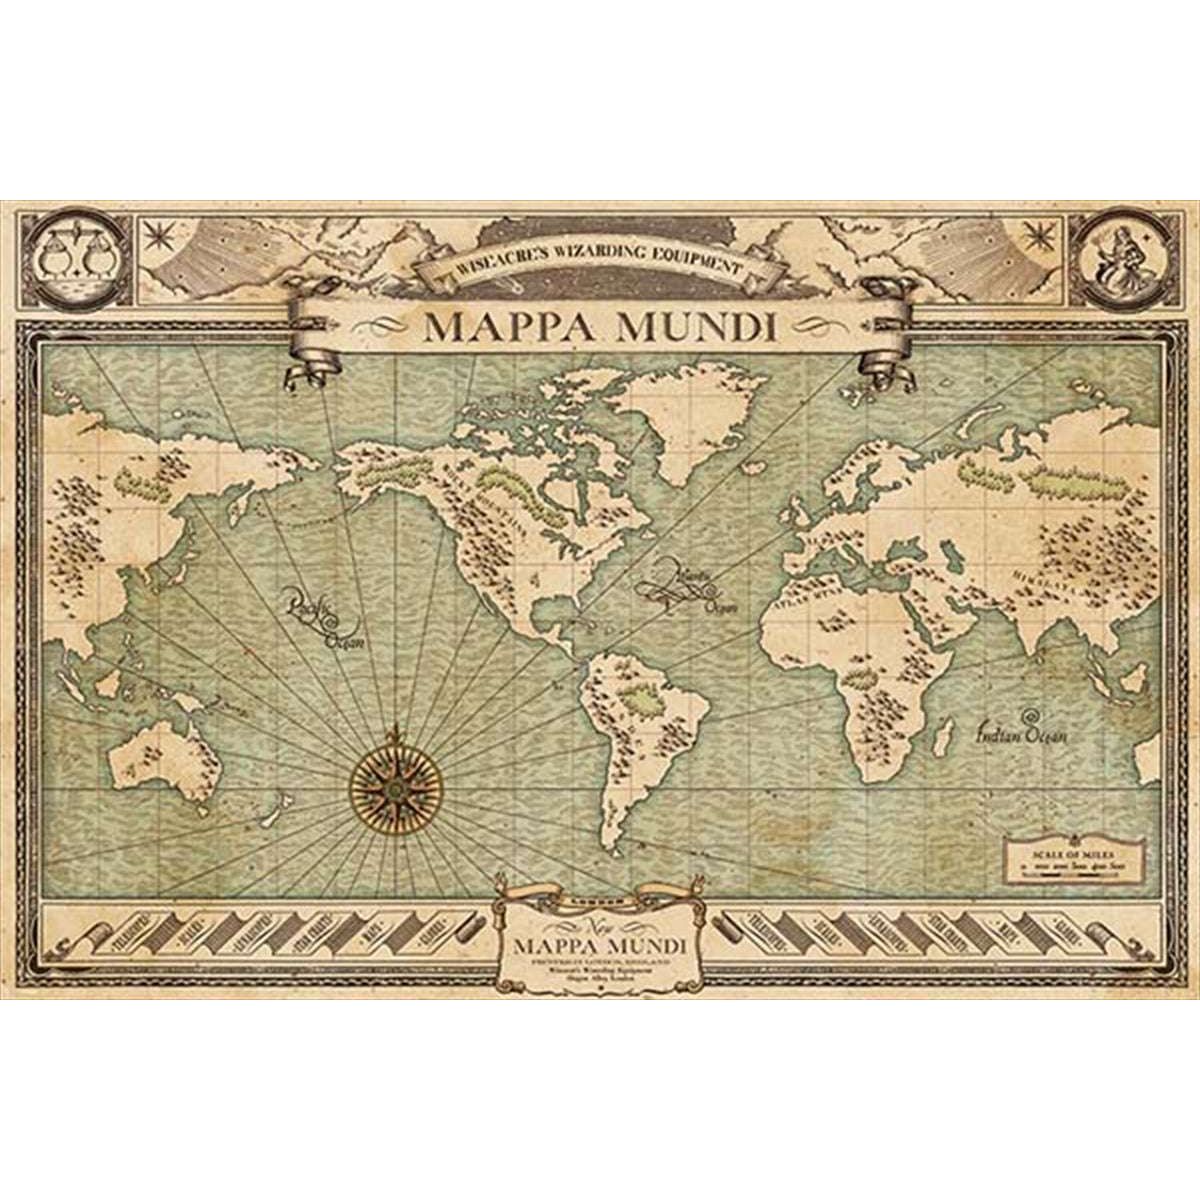 Fantastic Beasts And Where To Find Them - Mappa Mundi - Magdasmall